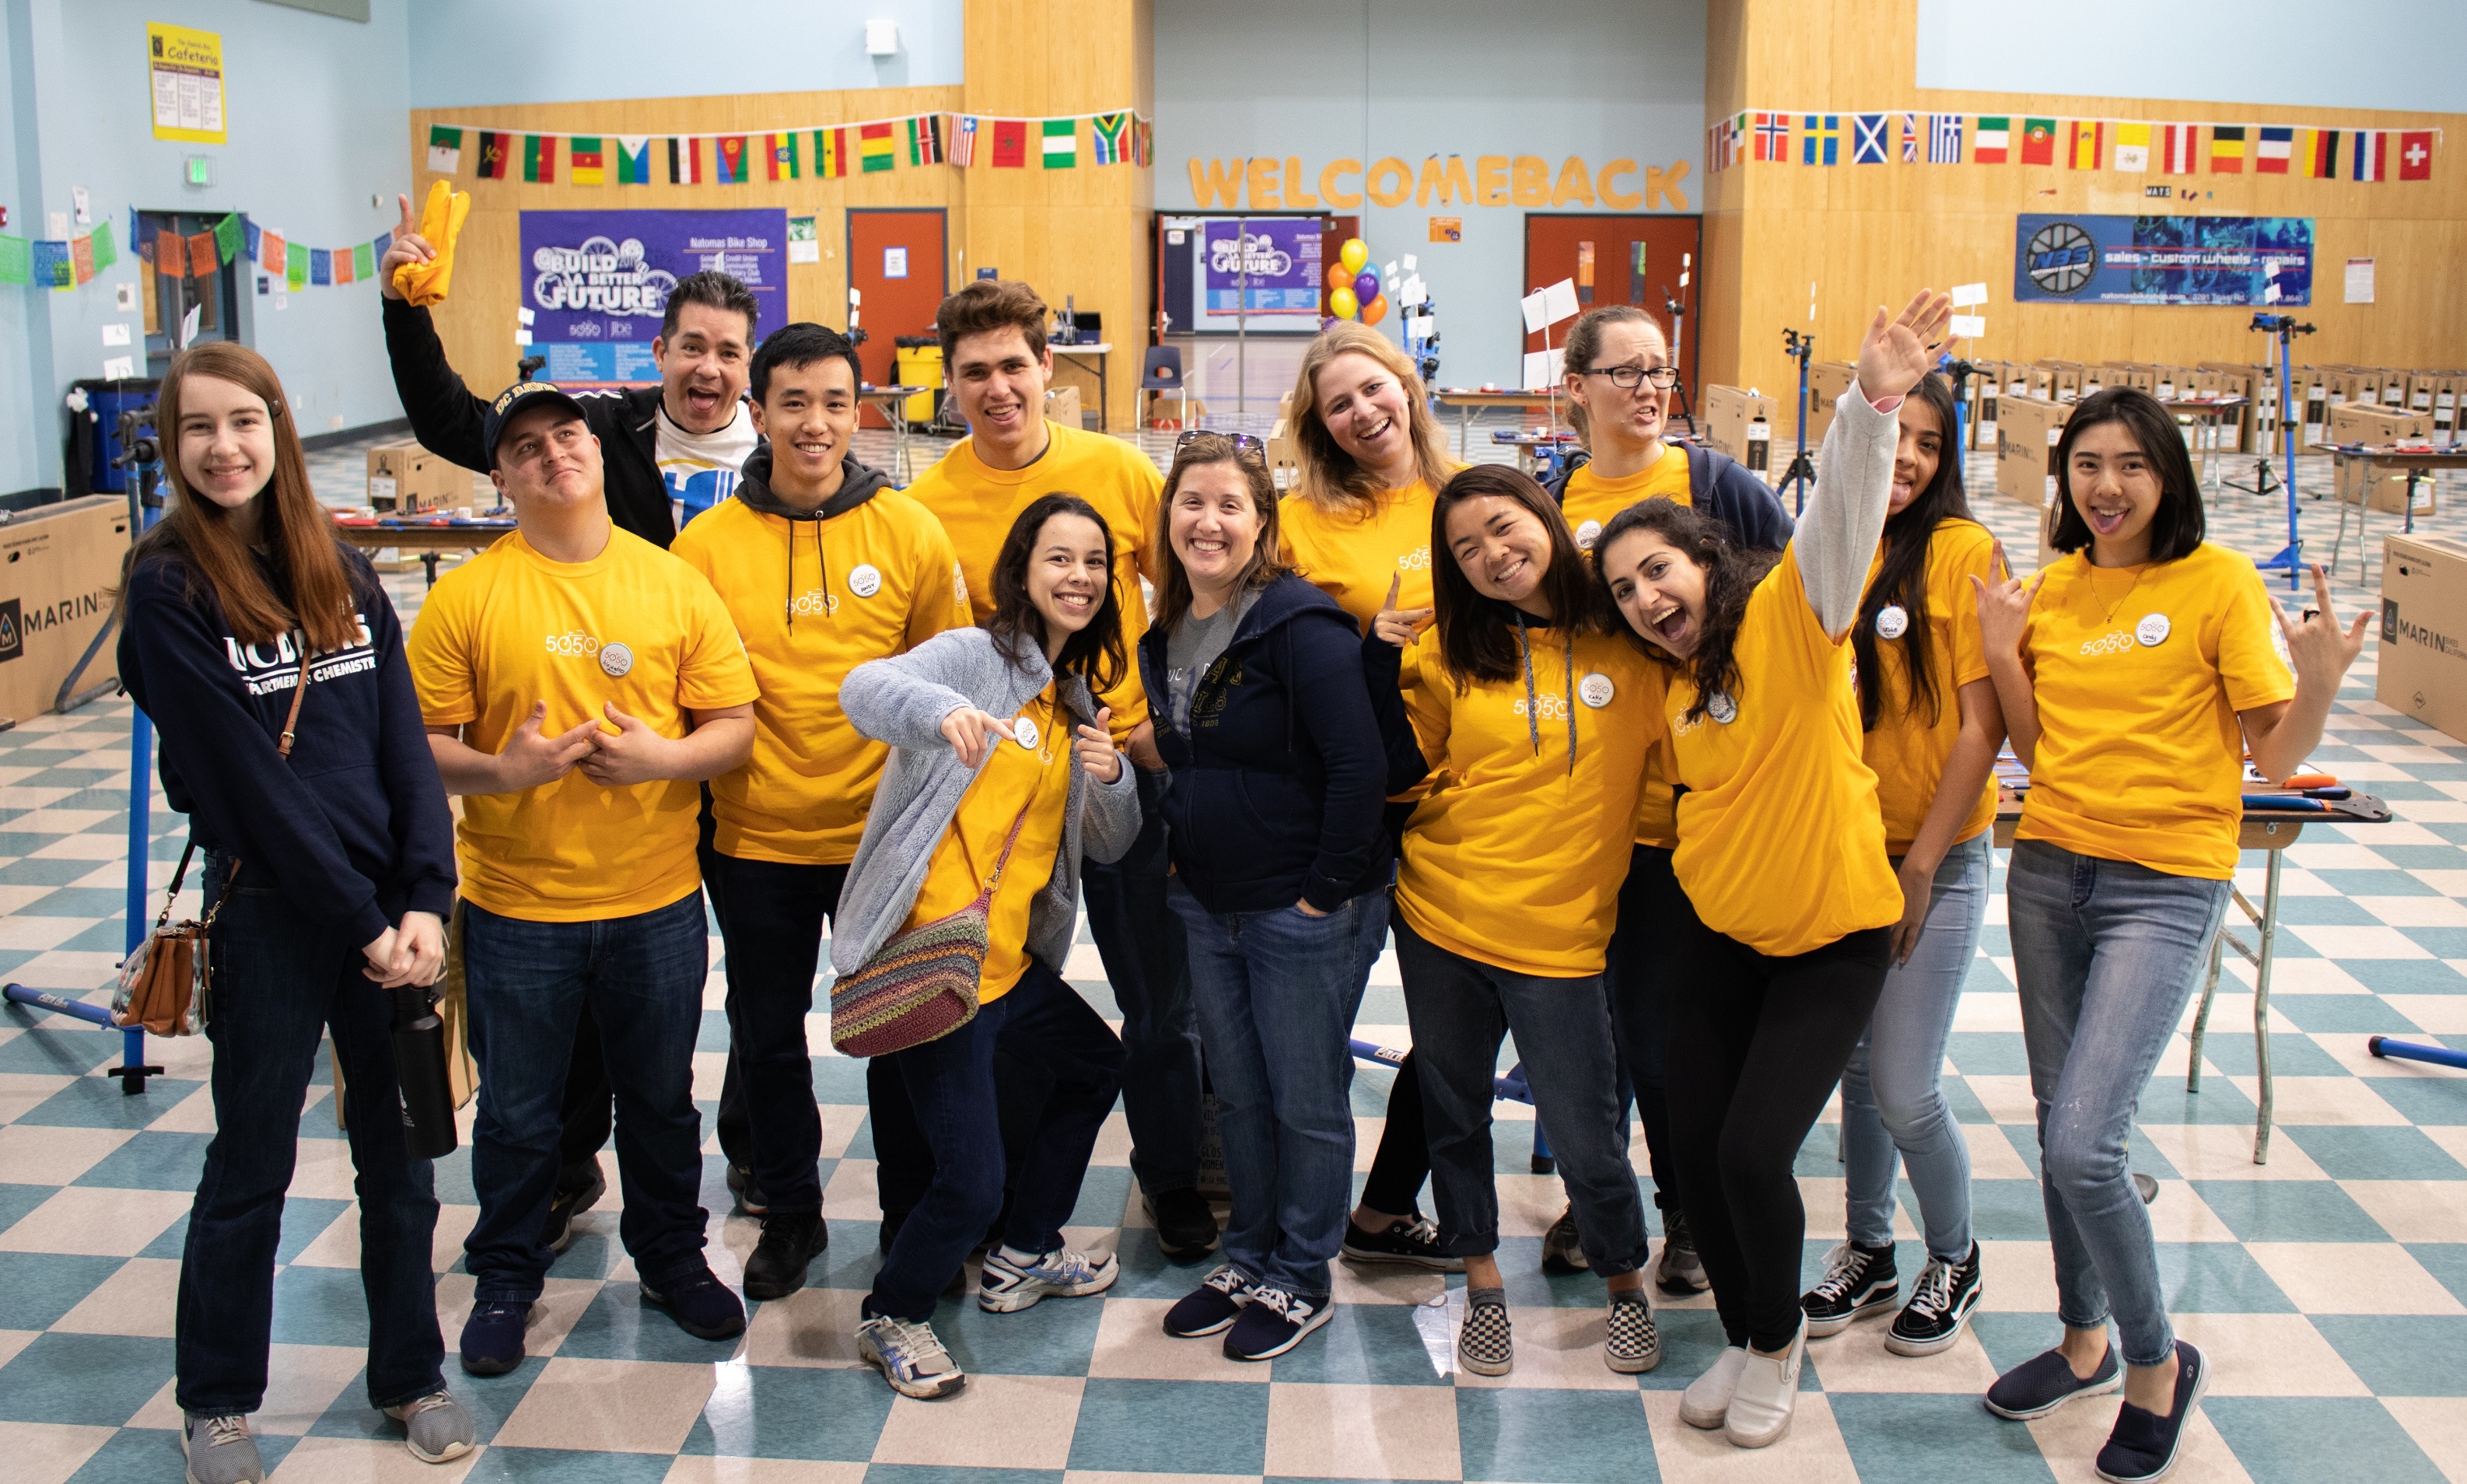 University Honors Program students and staff volunteer at 50 Bikes for 50 Kids on Martin Luther King Jr. Day in January 2019.